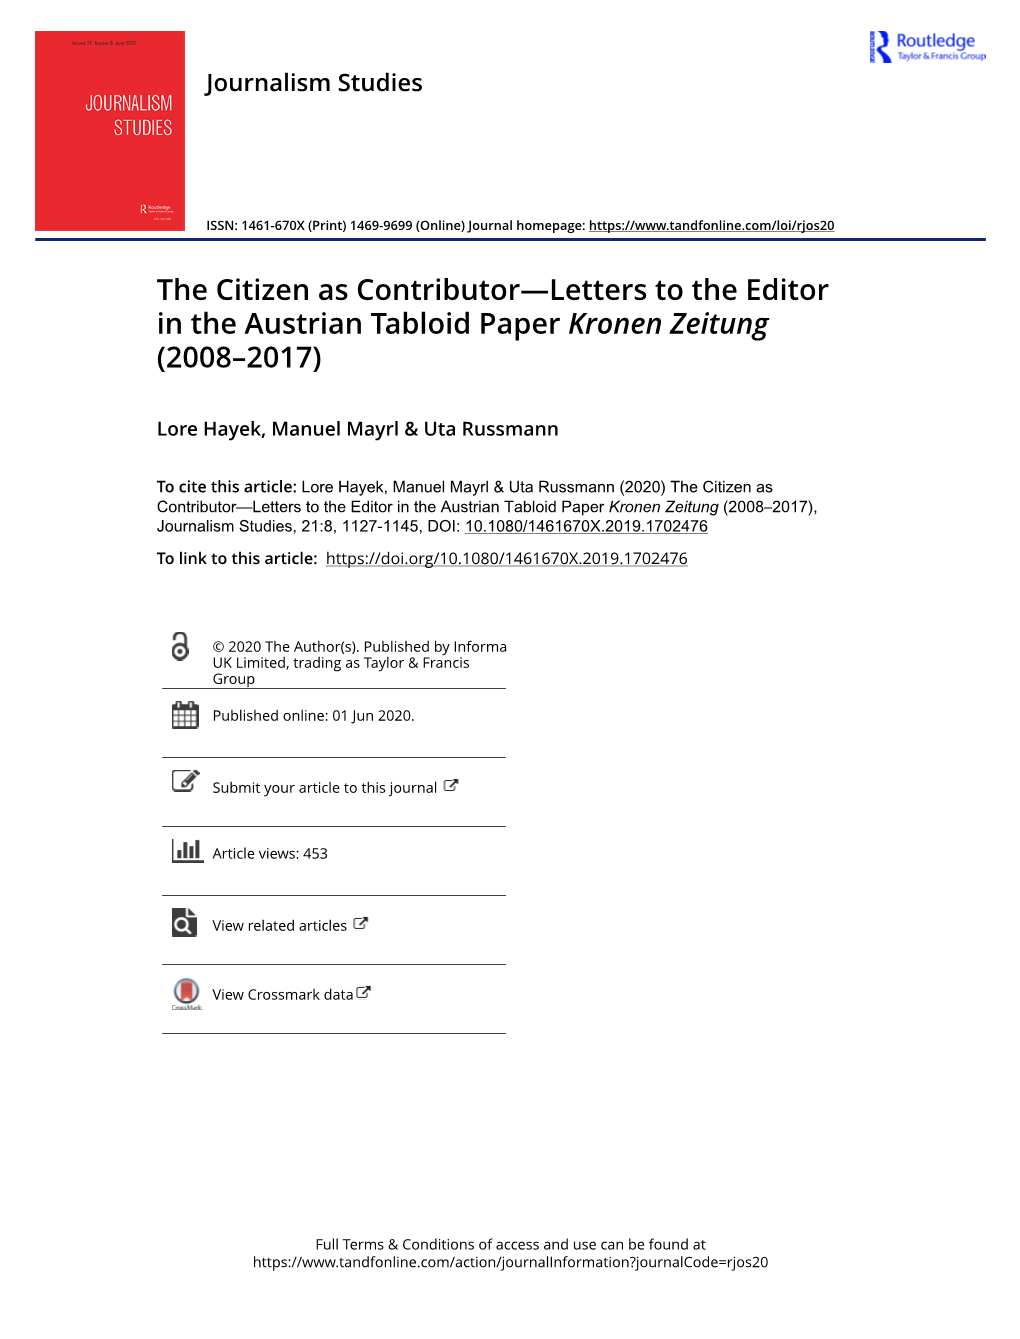 The Citizen As Contributor—Letters to the Editor in the Austrian Tabloid Paper Kronen Zeitung (2008–2017)